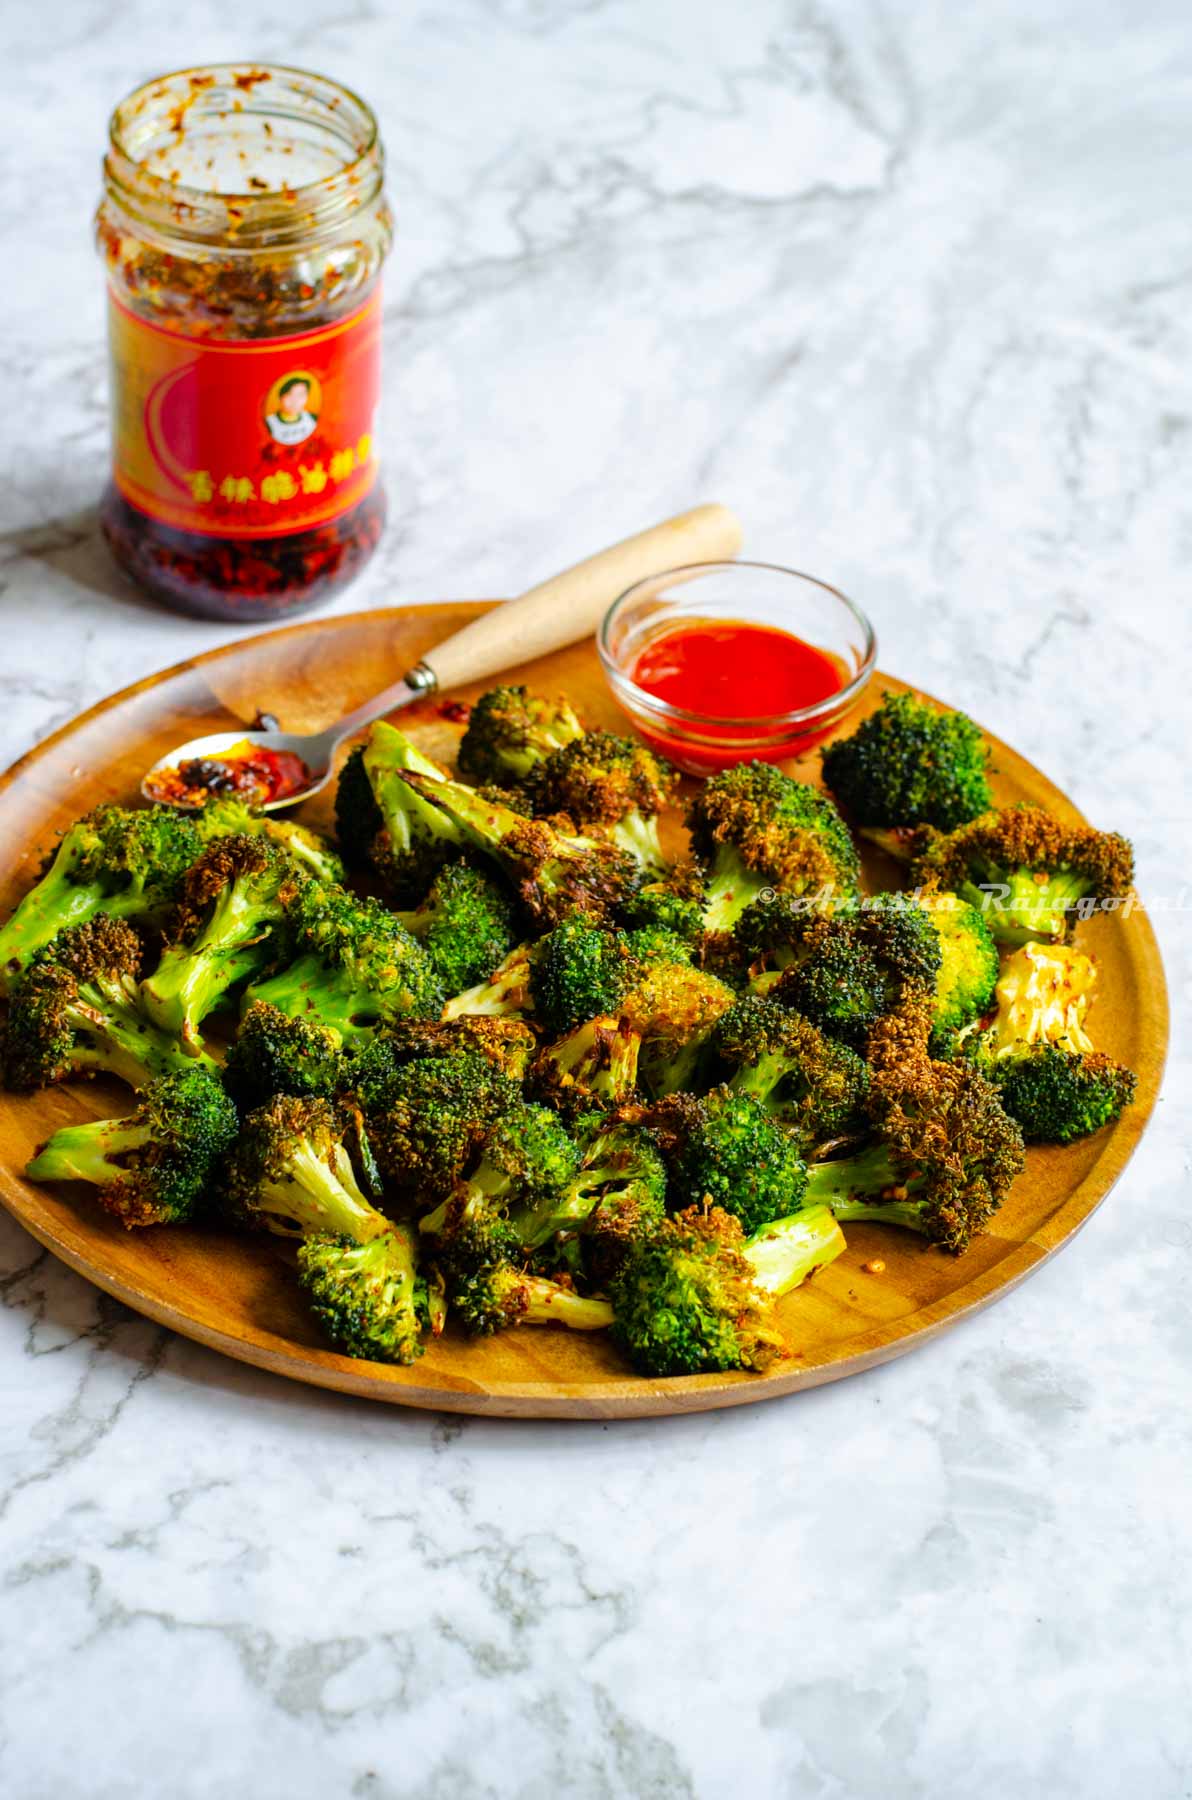 air fryer broccoli served on a wooden plate. A jar of chili crisp open at the far back of the background.